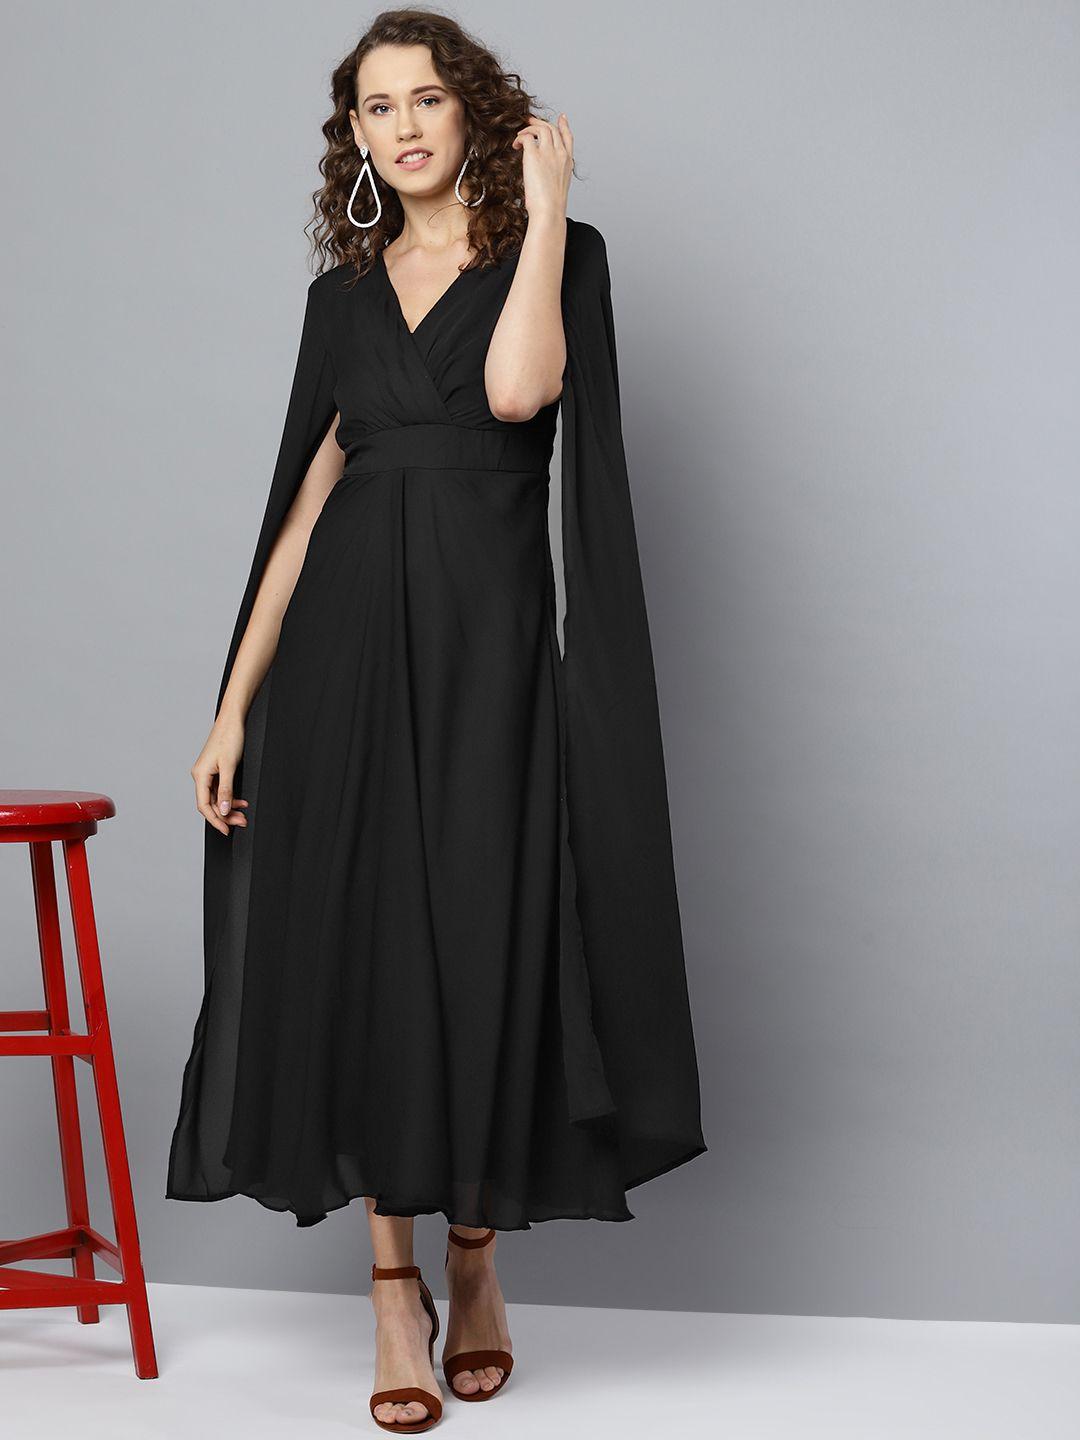 marie claire women black extended cape sleeves solid wrap maxi dress